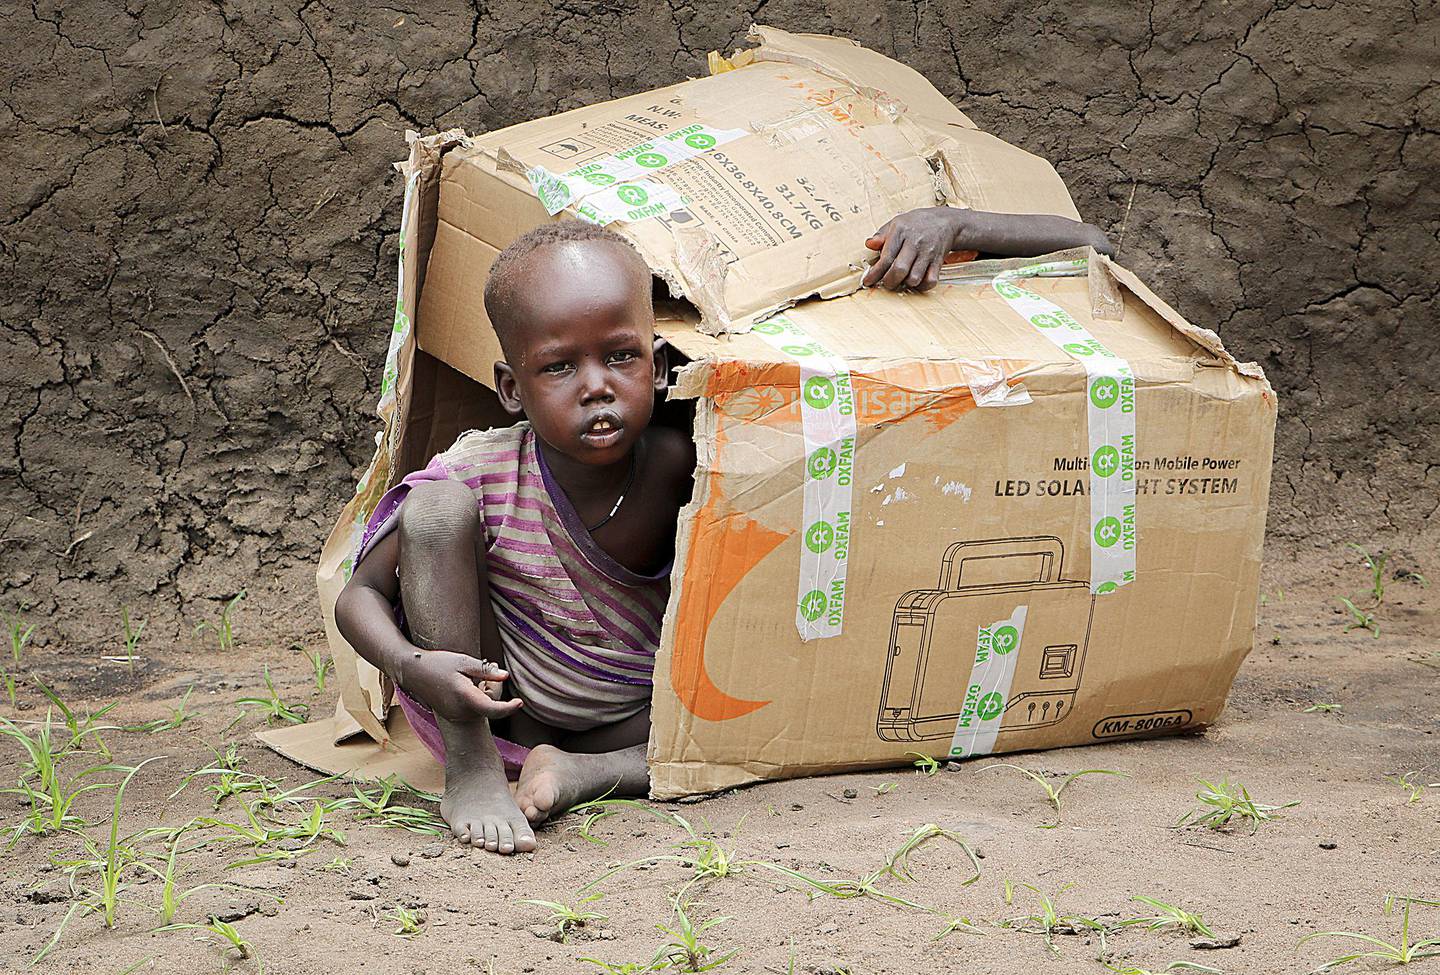 FILE - In this Friday, Aug. 17, 2018 file photo, two young boys play inside a cardboard box during an aid distribution by international humanitarian group Oxfam on the island of Nyajam, off the mainland from the opposition-held town of Nyal in Unity state, in South Sudan. An adviser to South Sudan's president said Thursday, Dec. 19, 2019 that the country is recalling its ambassador to the United States, in response to sanctions placed by the U.S. Treasury earlier this week on two senior South Sudanese officials. (AP Photo/Sam Mednick, File)